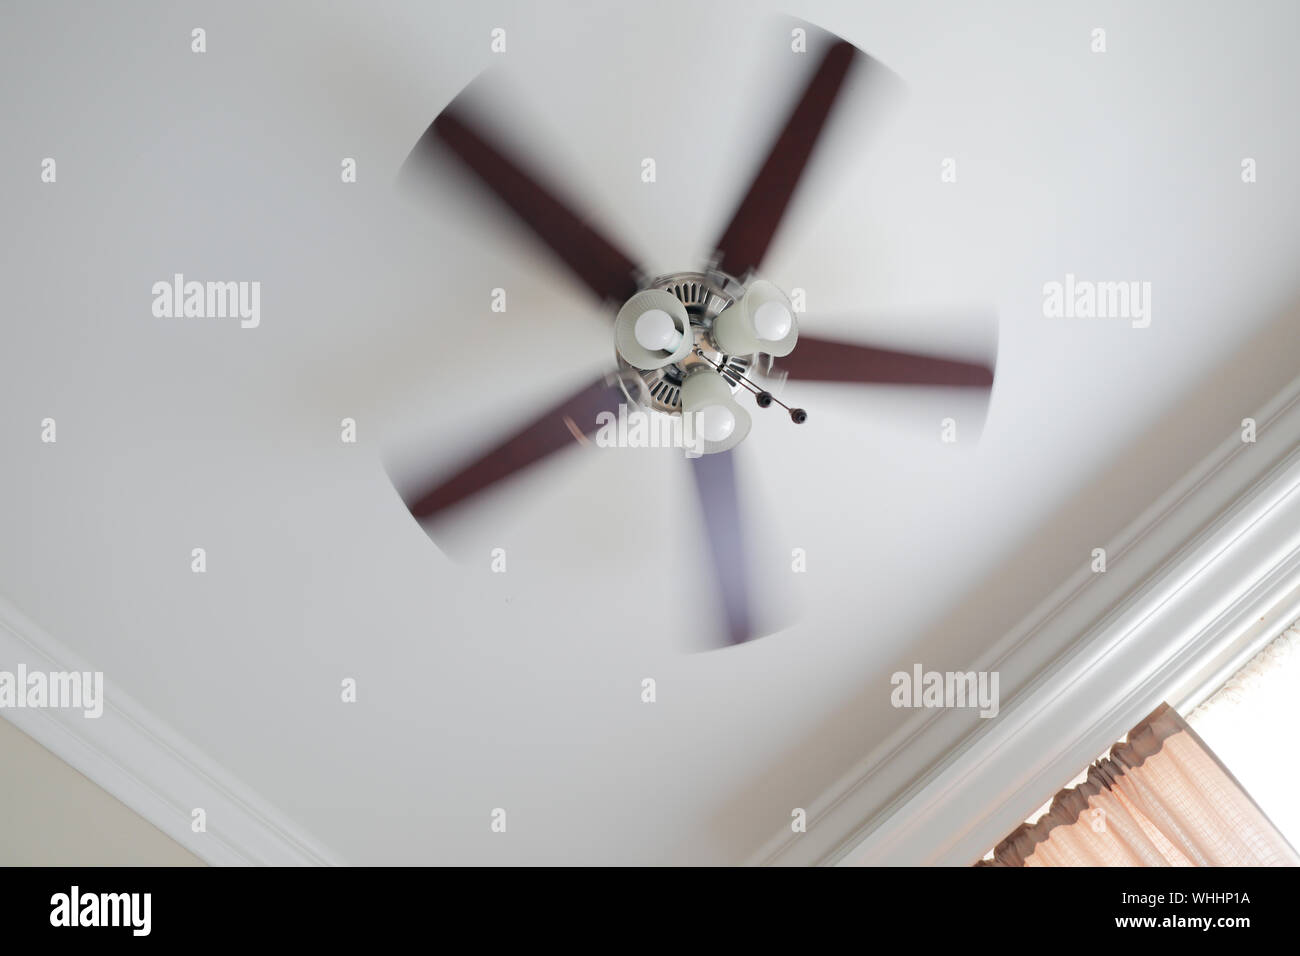 Ceiling fan with a ceiling lamp turned on, working with blurred blades in a living room, ceiling with moldings, curtain with shades and rods. Stock Photo